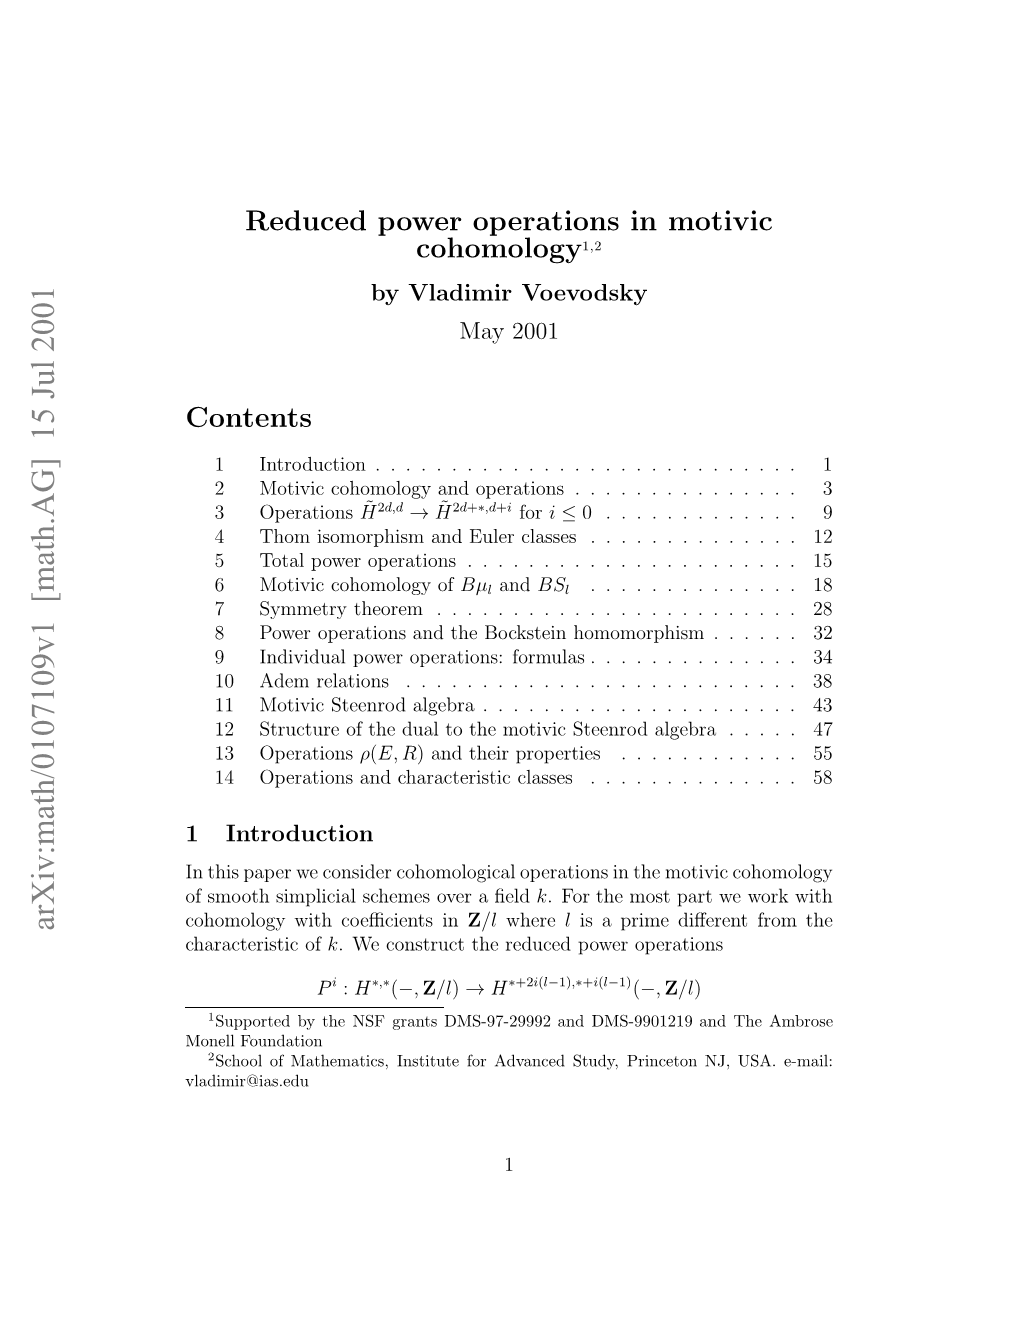 Reduced Power Operations in Motivic Cohomology1,2